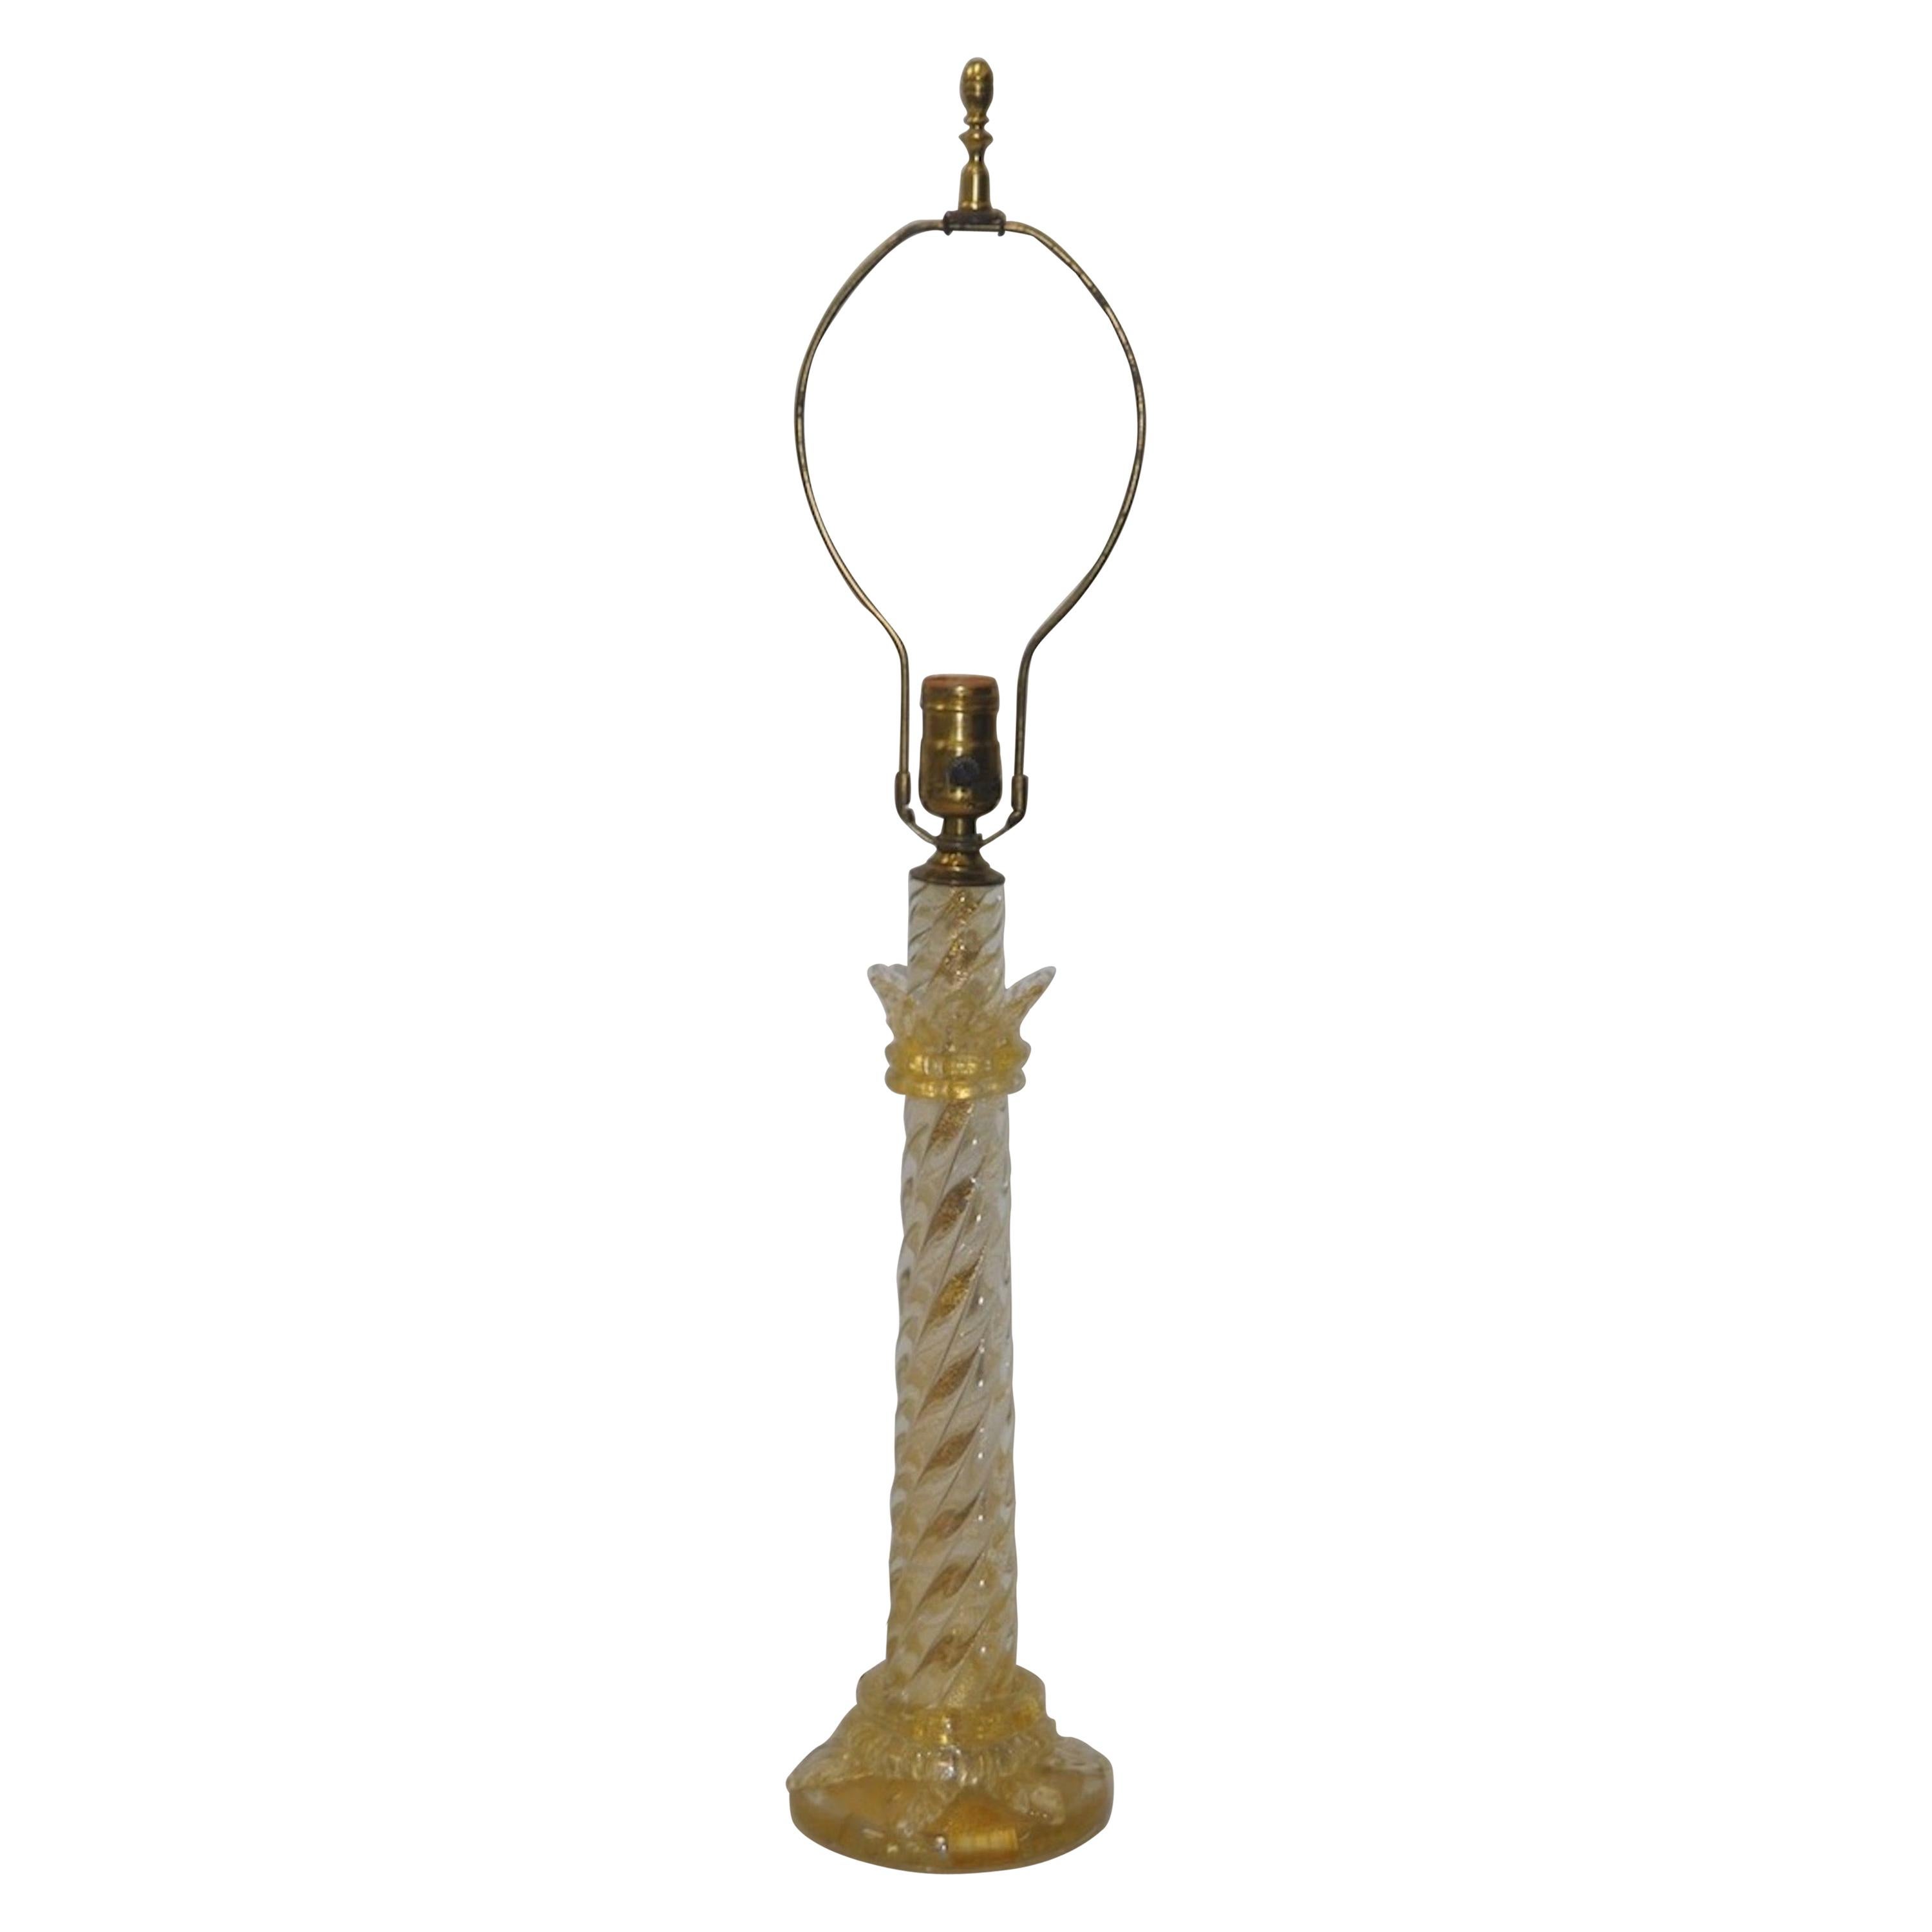 Vintage Murano Gold Fleck Table Lamp Attributed to Barovier, circa 1940s